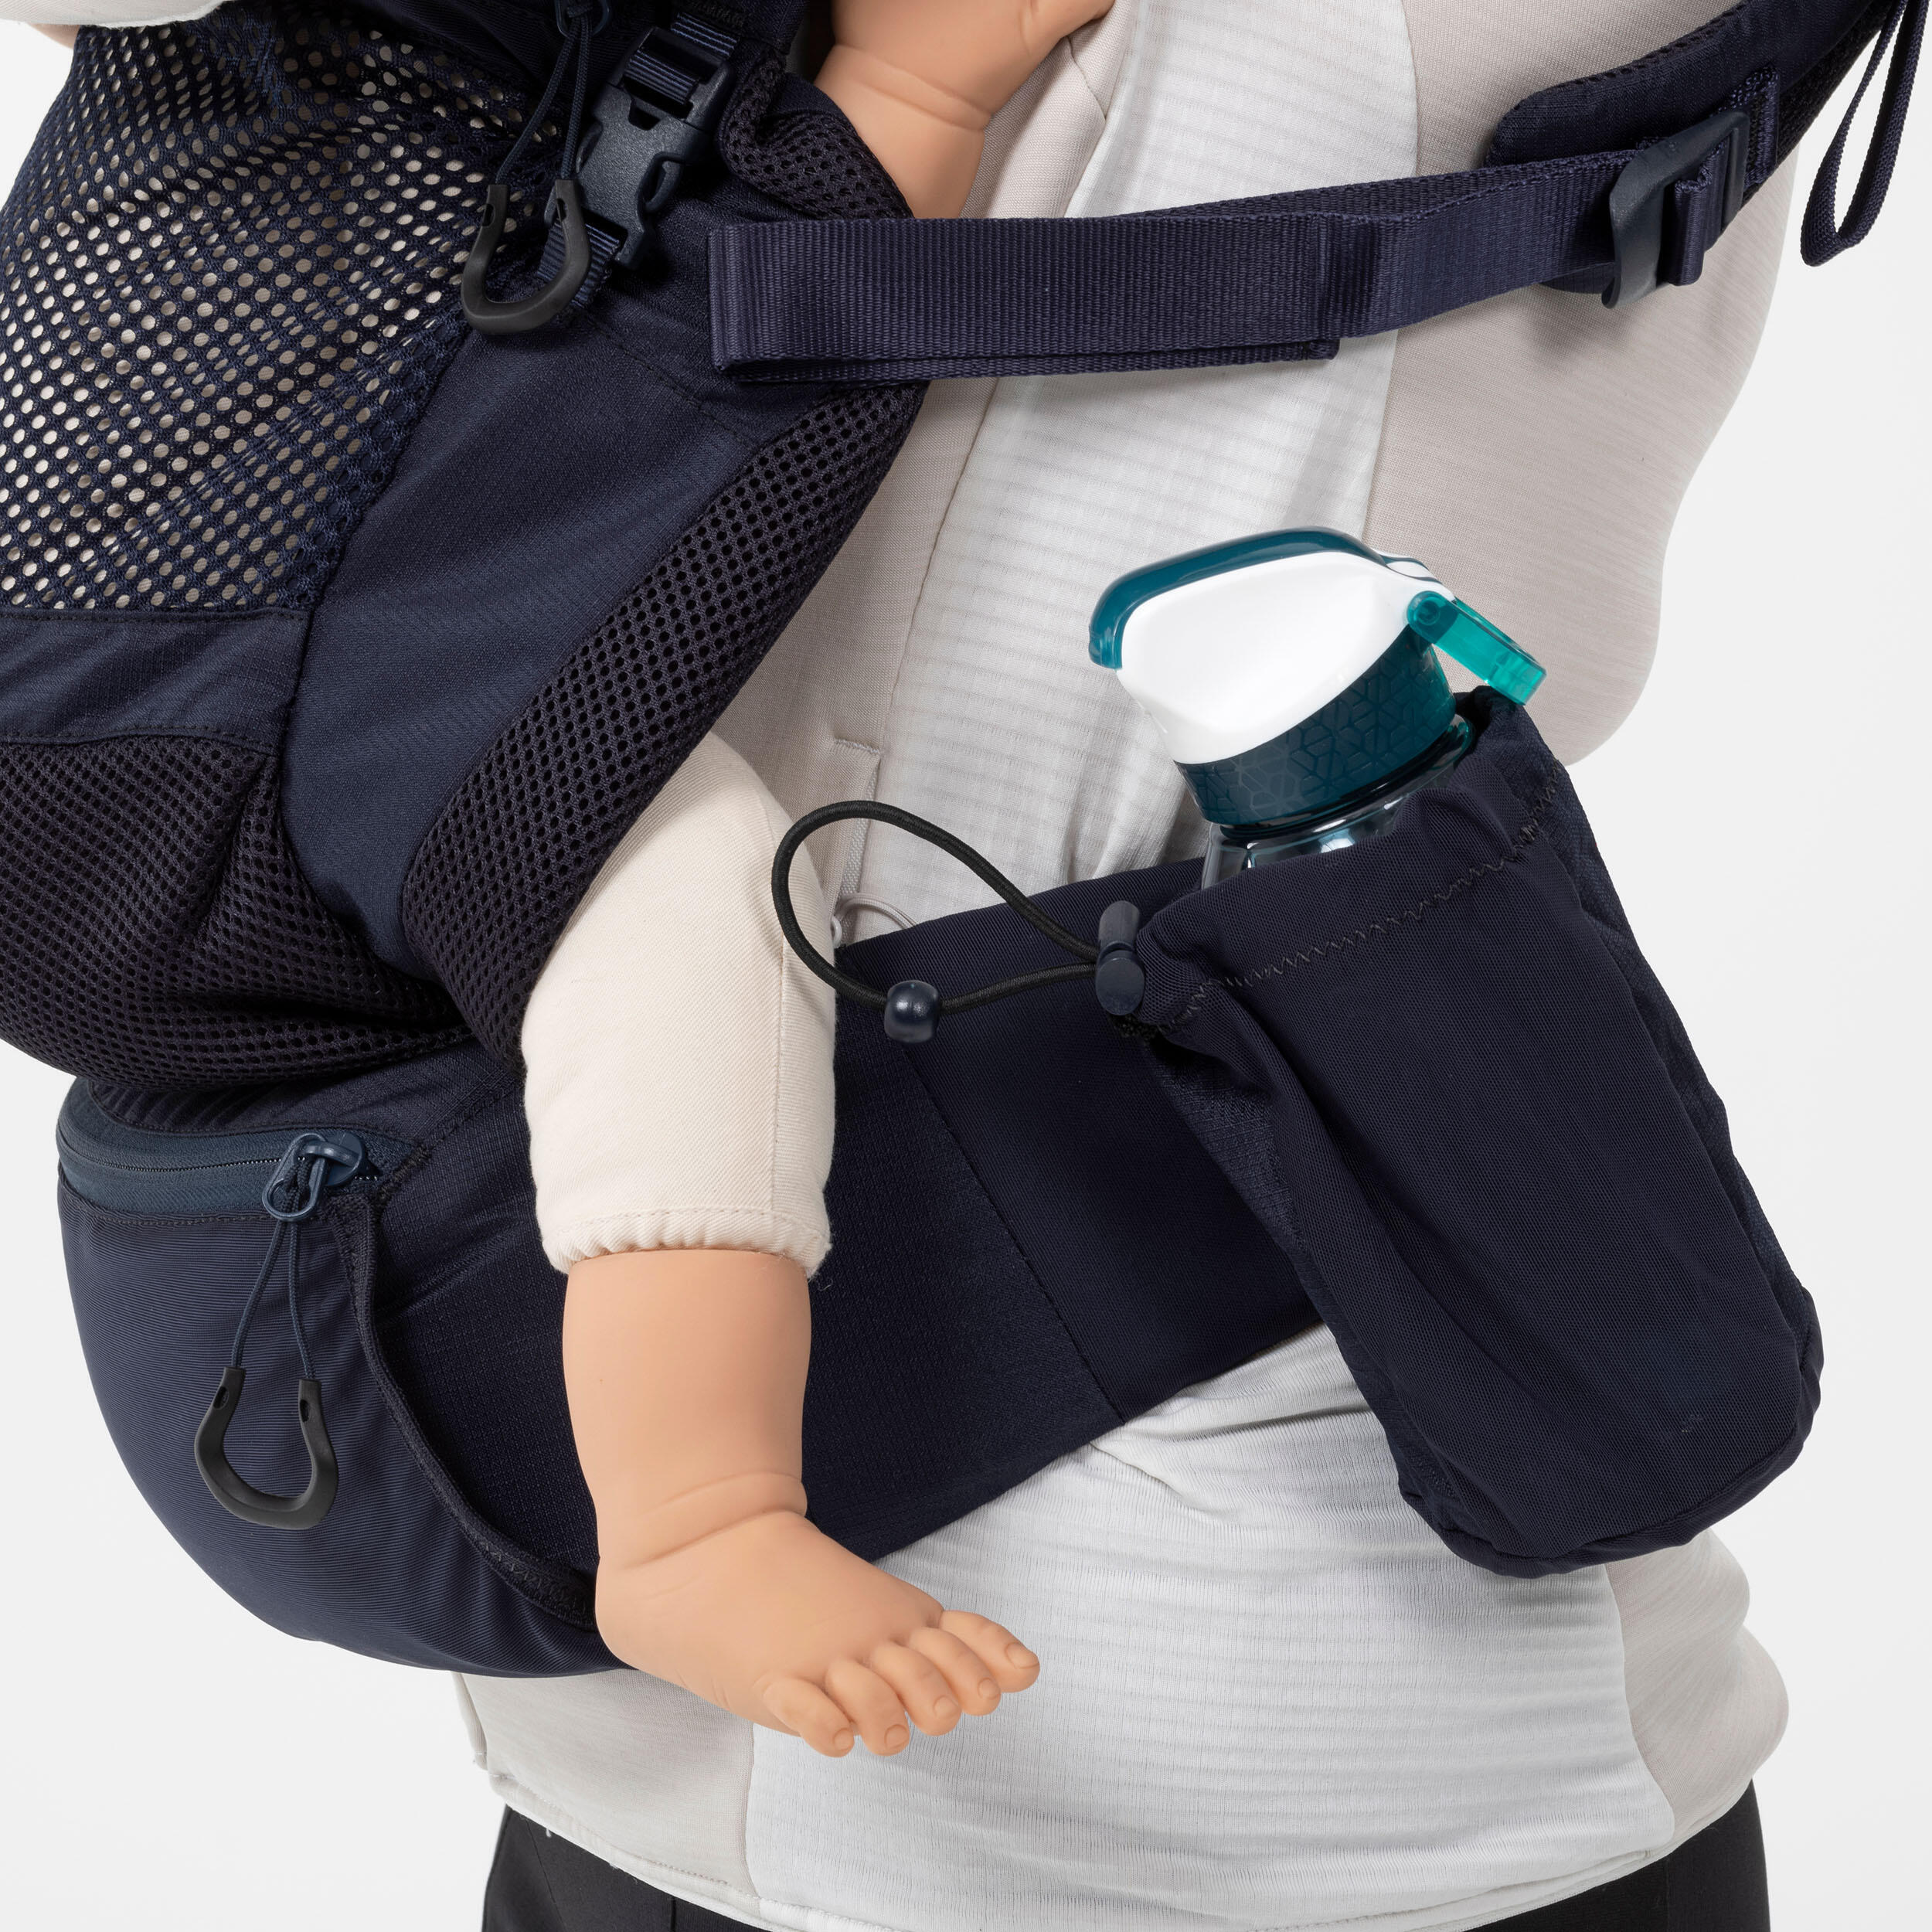 Physiological Baby Carrier from 9 months to 15 kg - MH500 Navy Blue 10/15